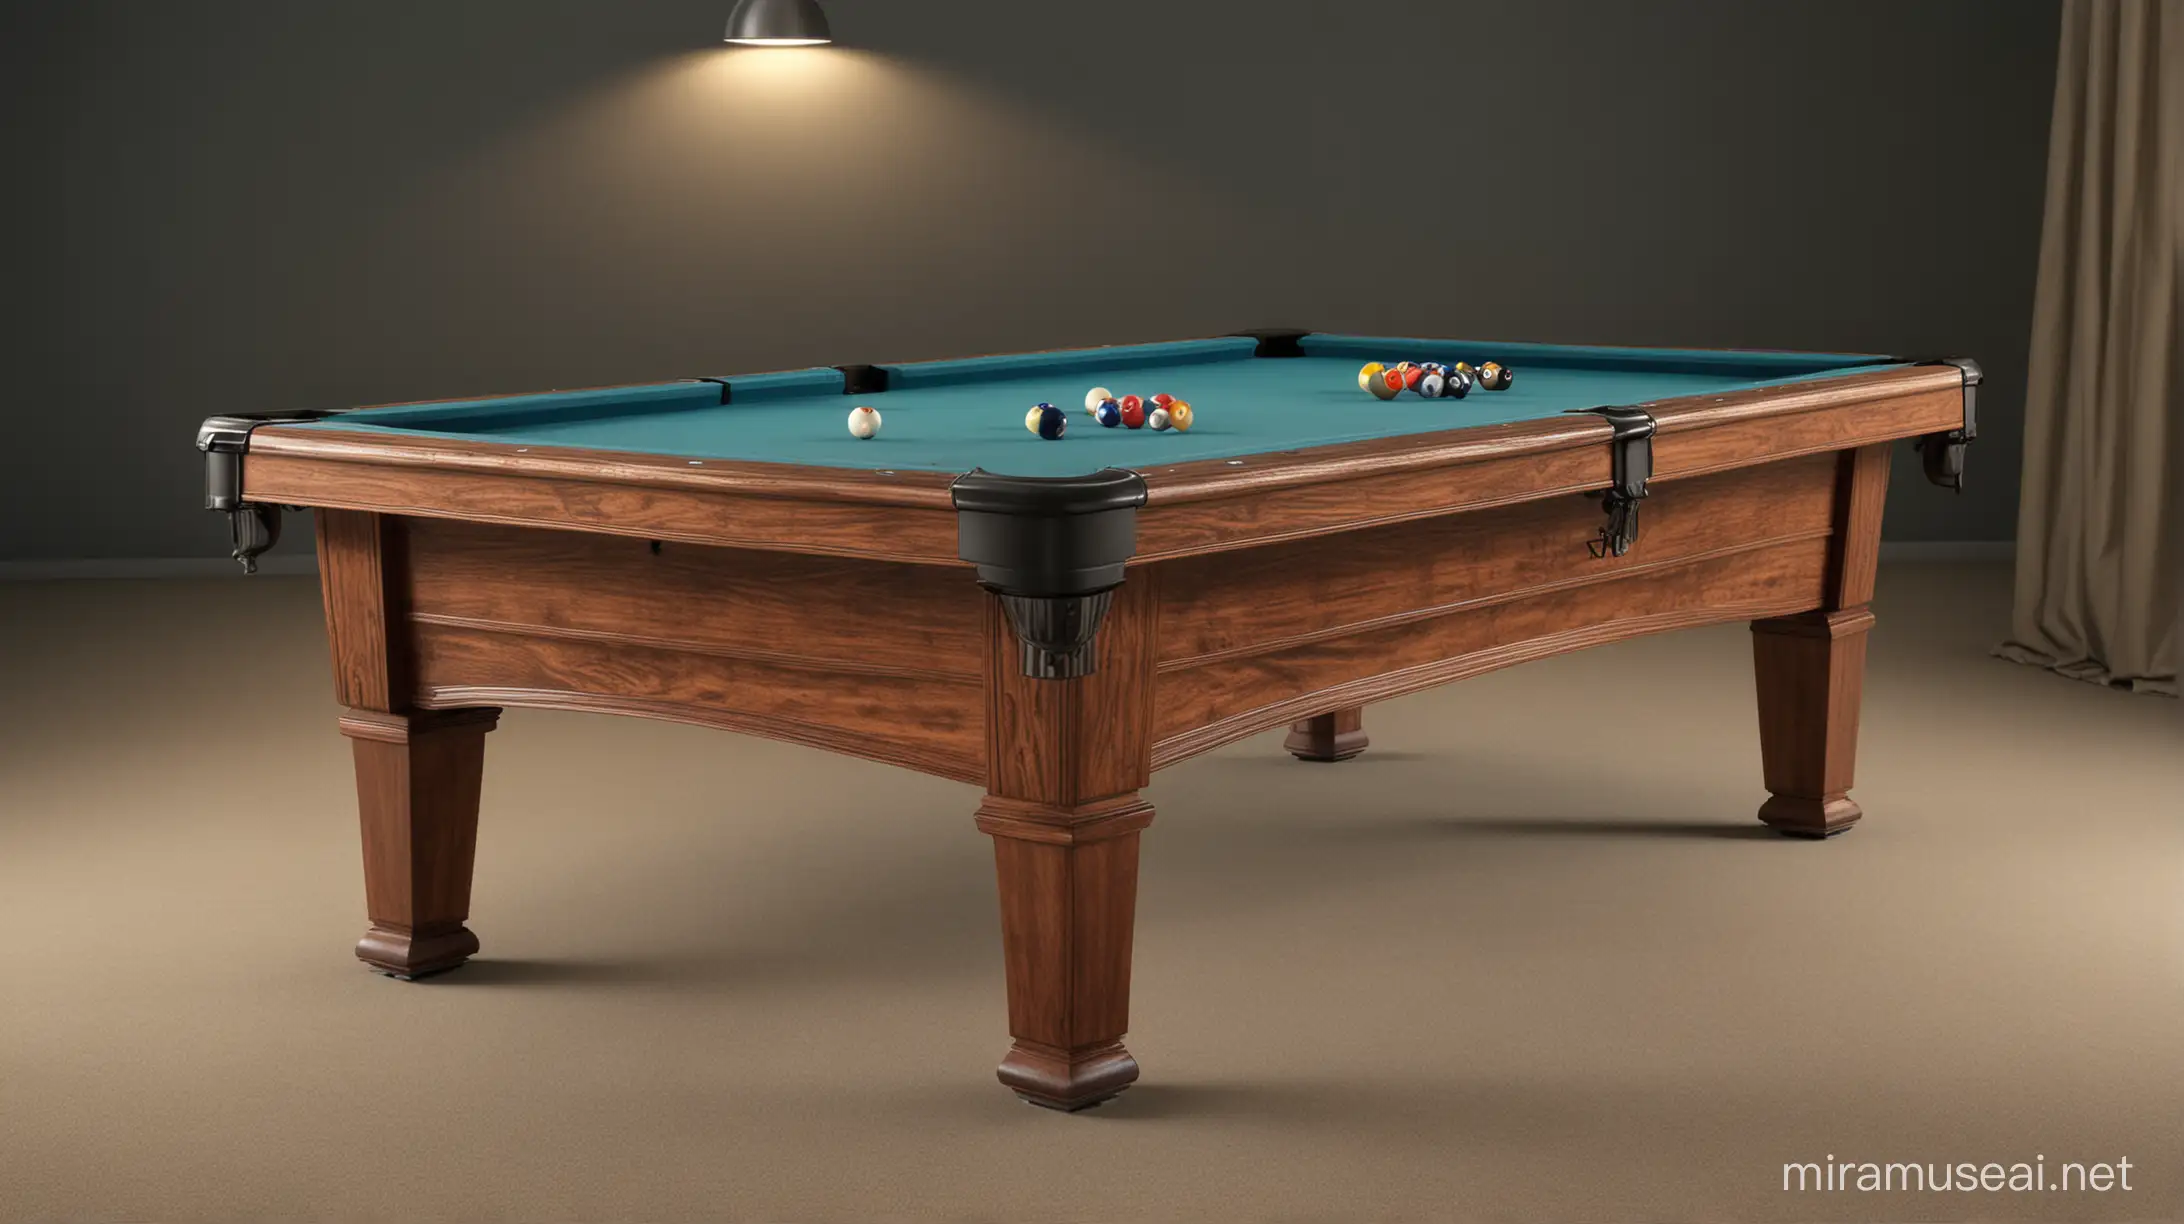 Very high quality 4K image of a pool table at an opposite angle